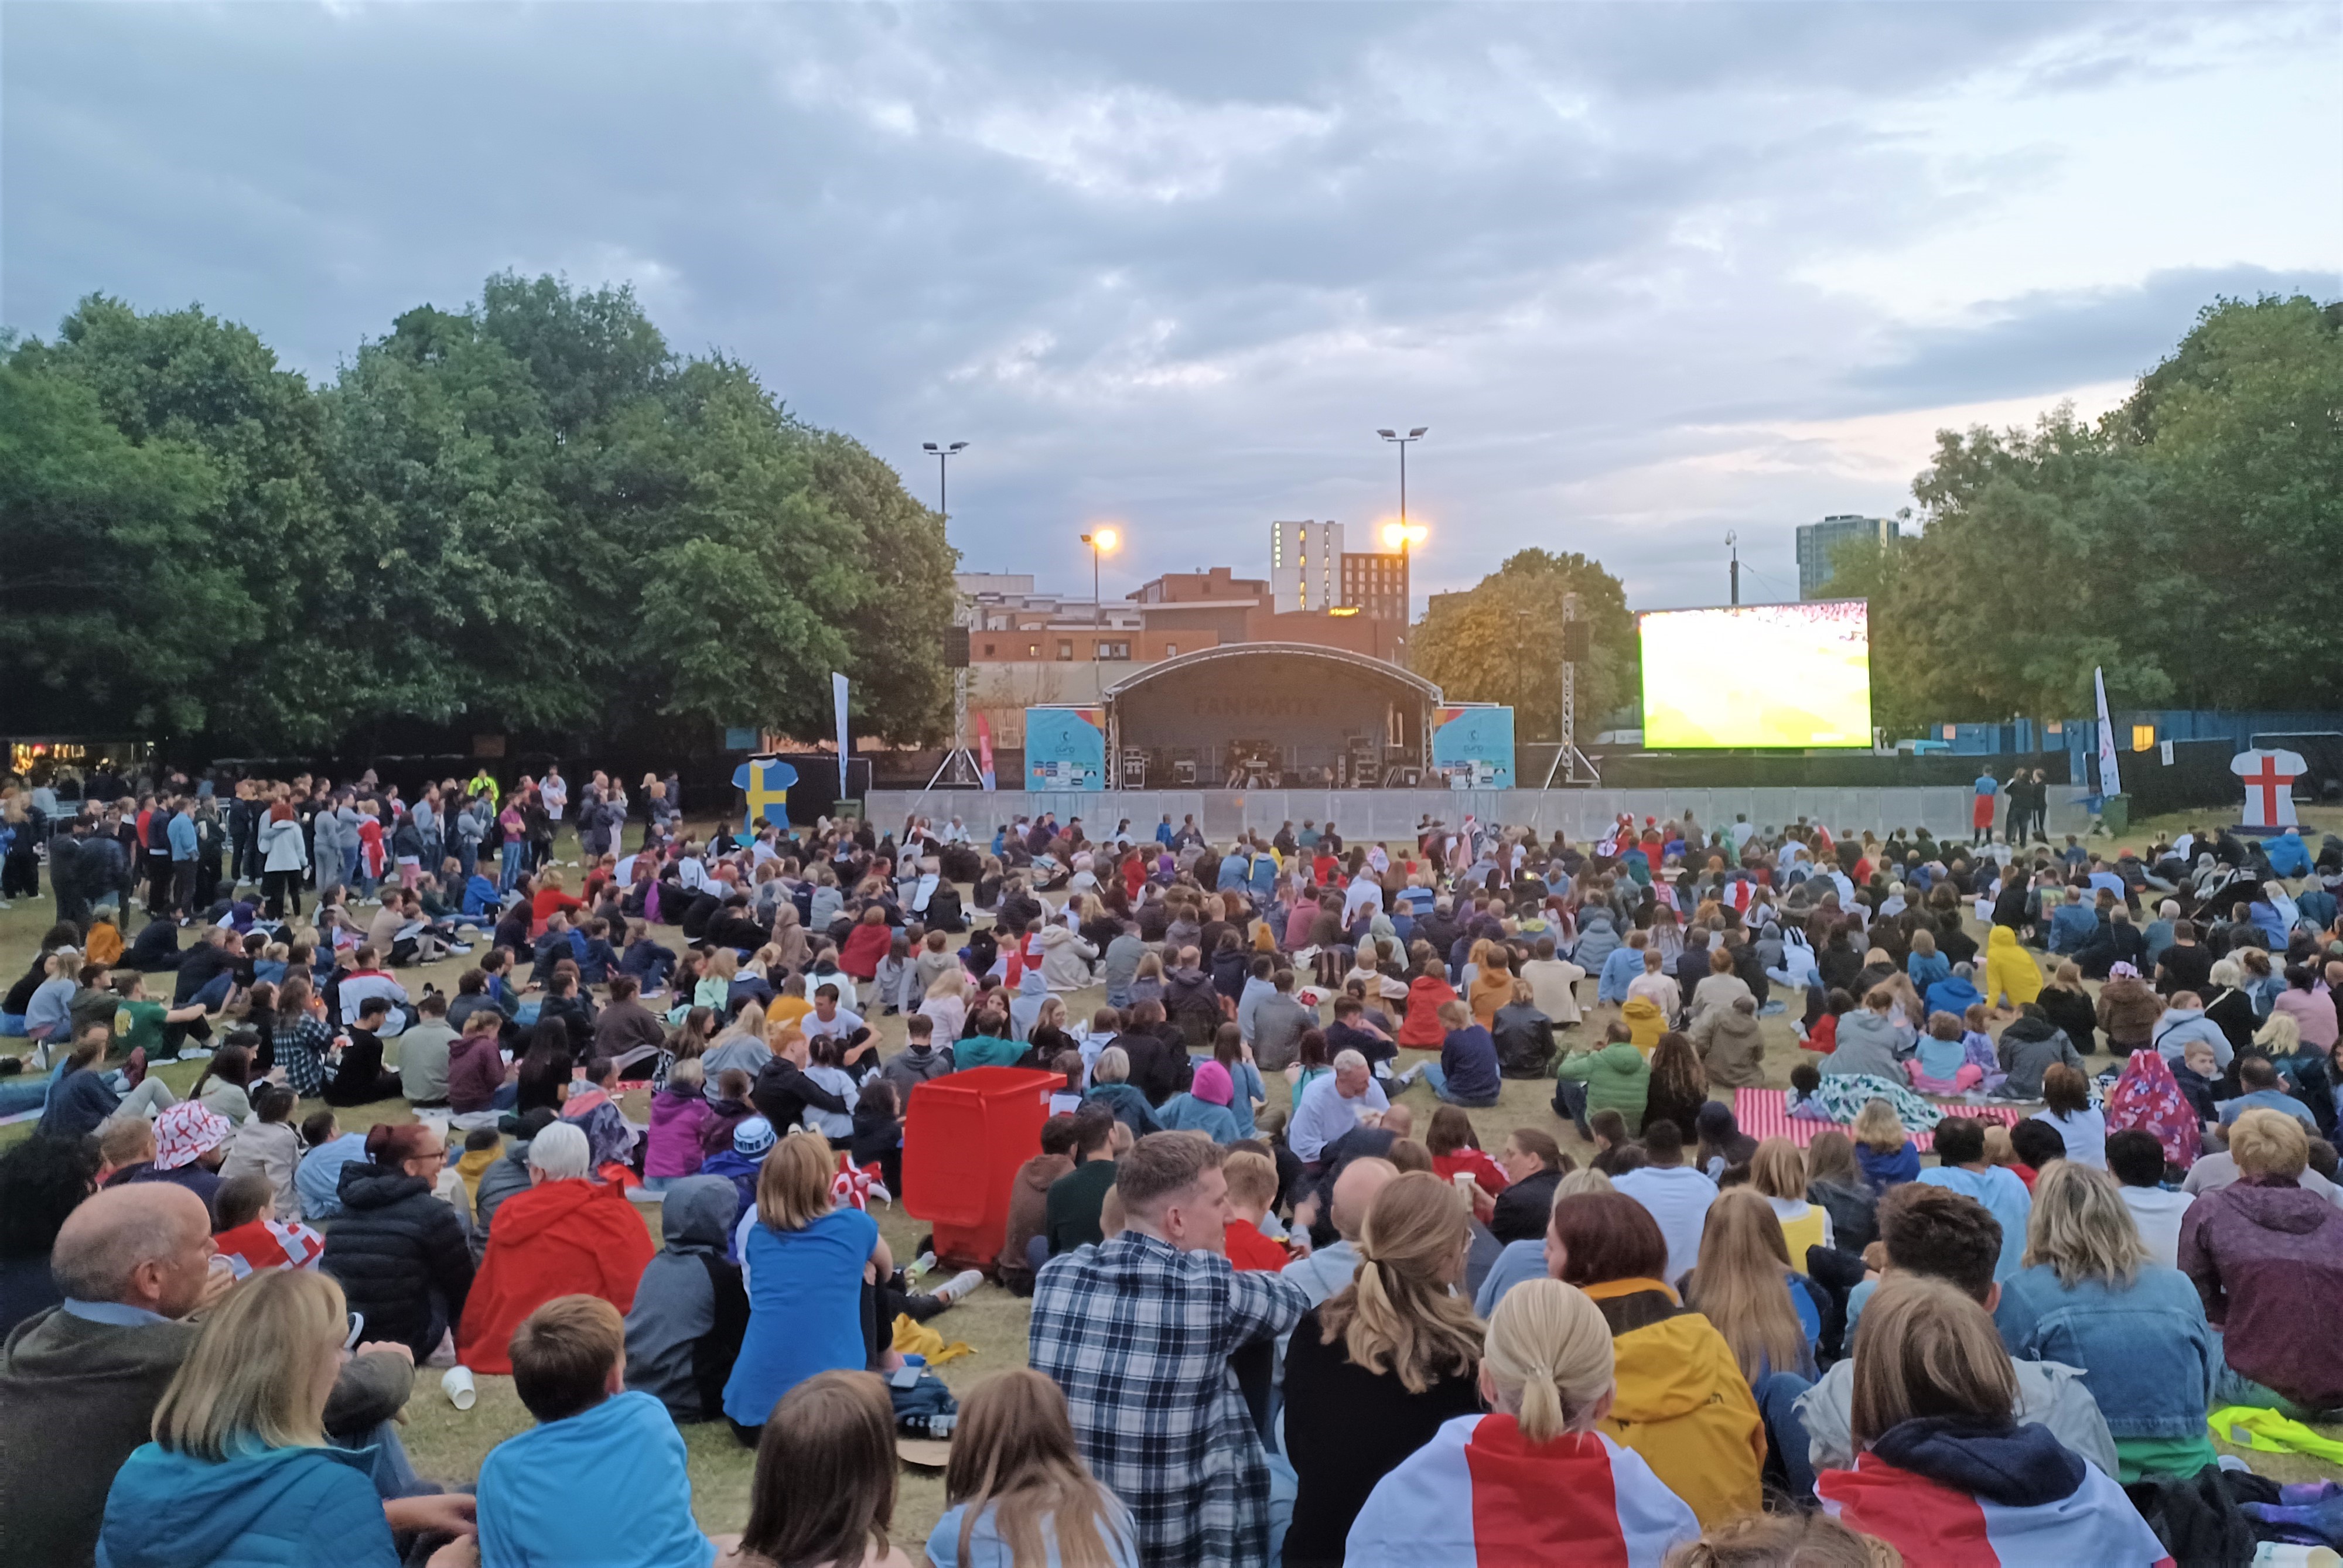 A crowd of people sitting in front of a large stage and screen on Devonshire Green in Sheffield